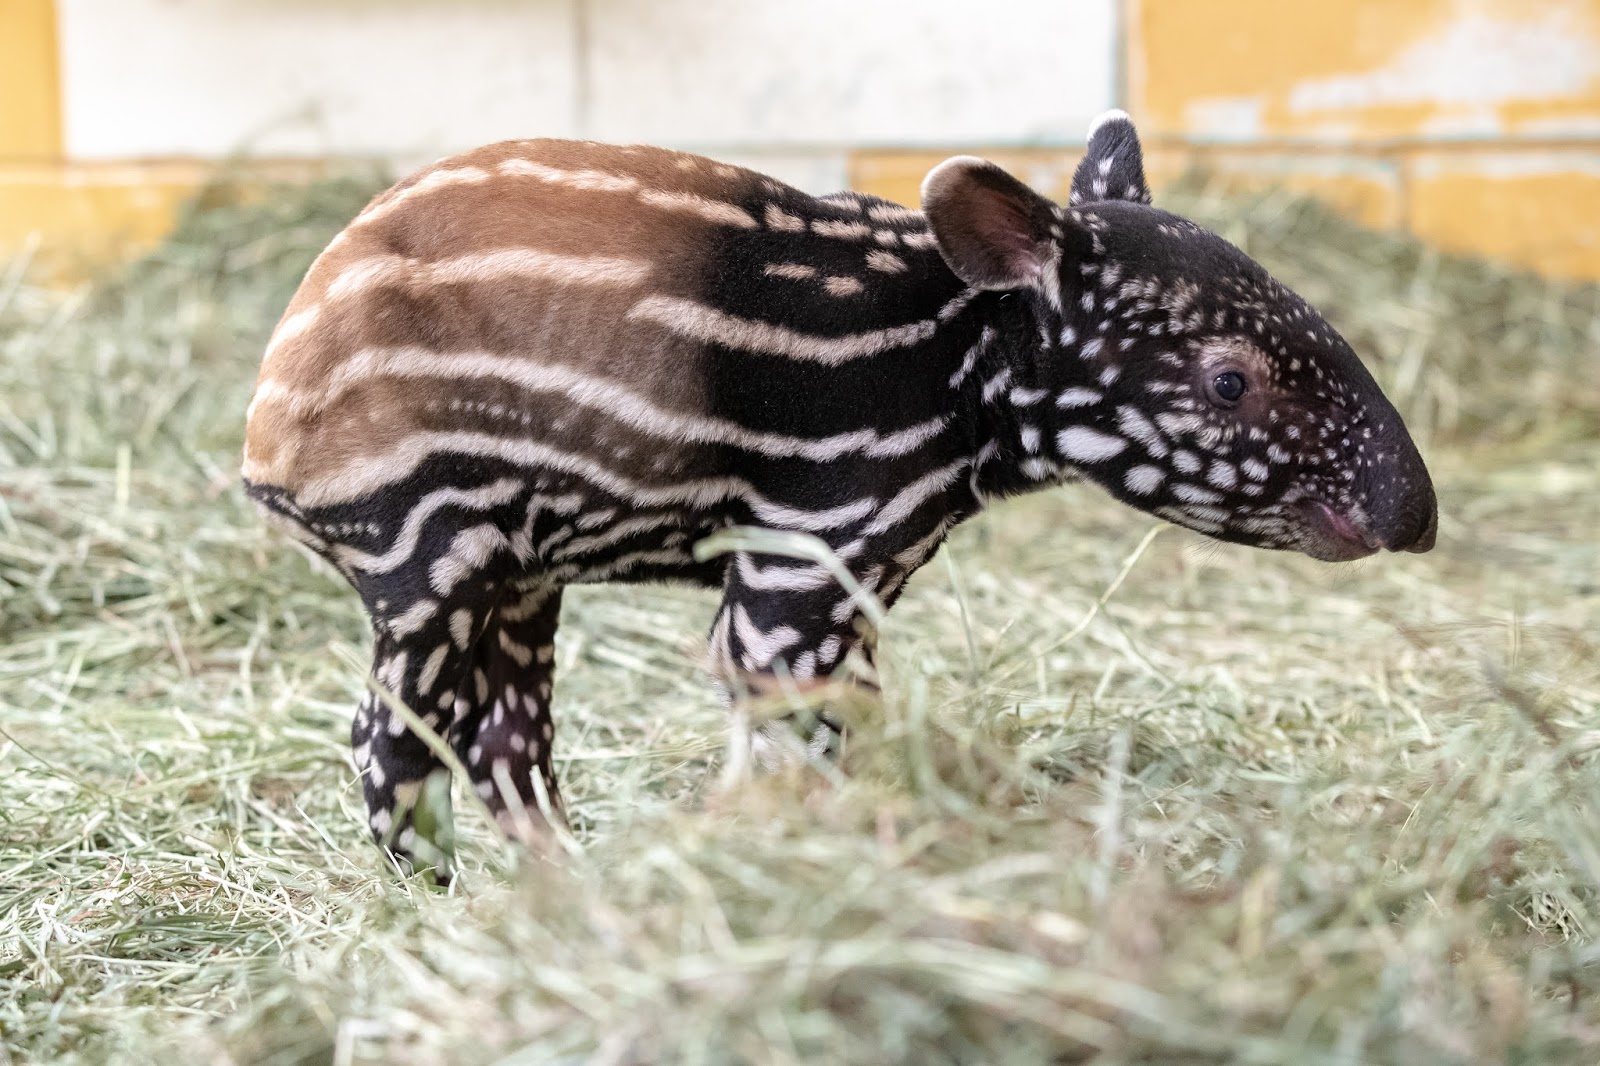 Ulan gave birth June 10! Tapir calf is healthy, strong and totally adorable.